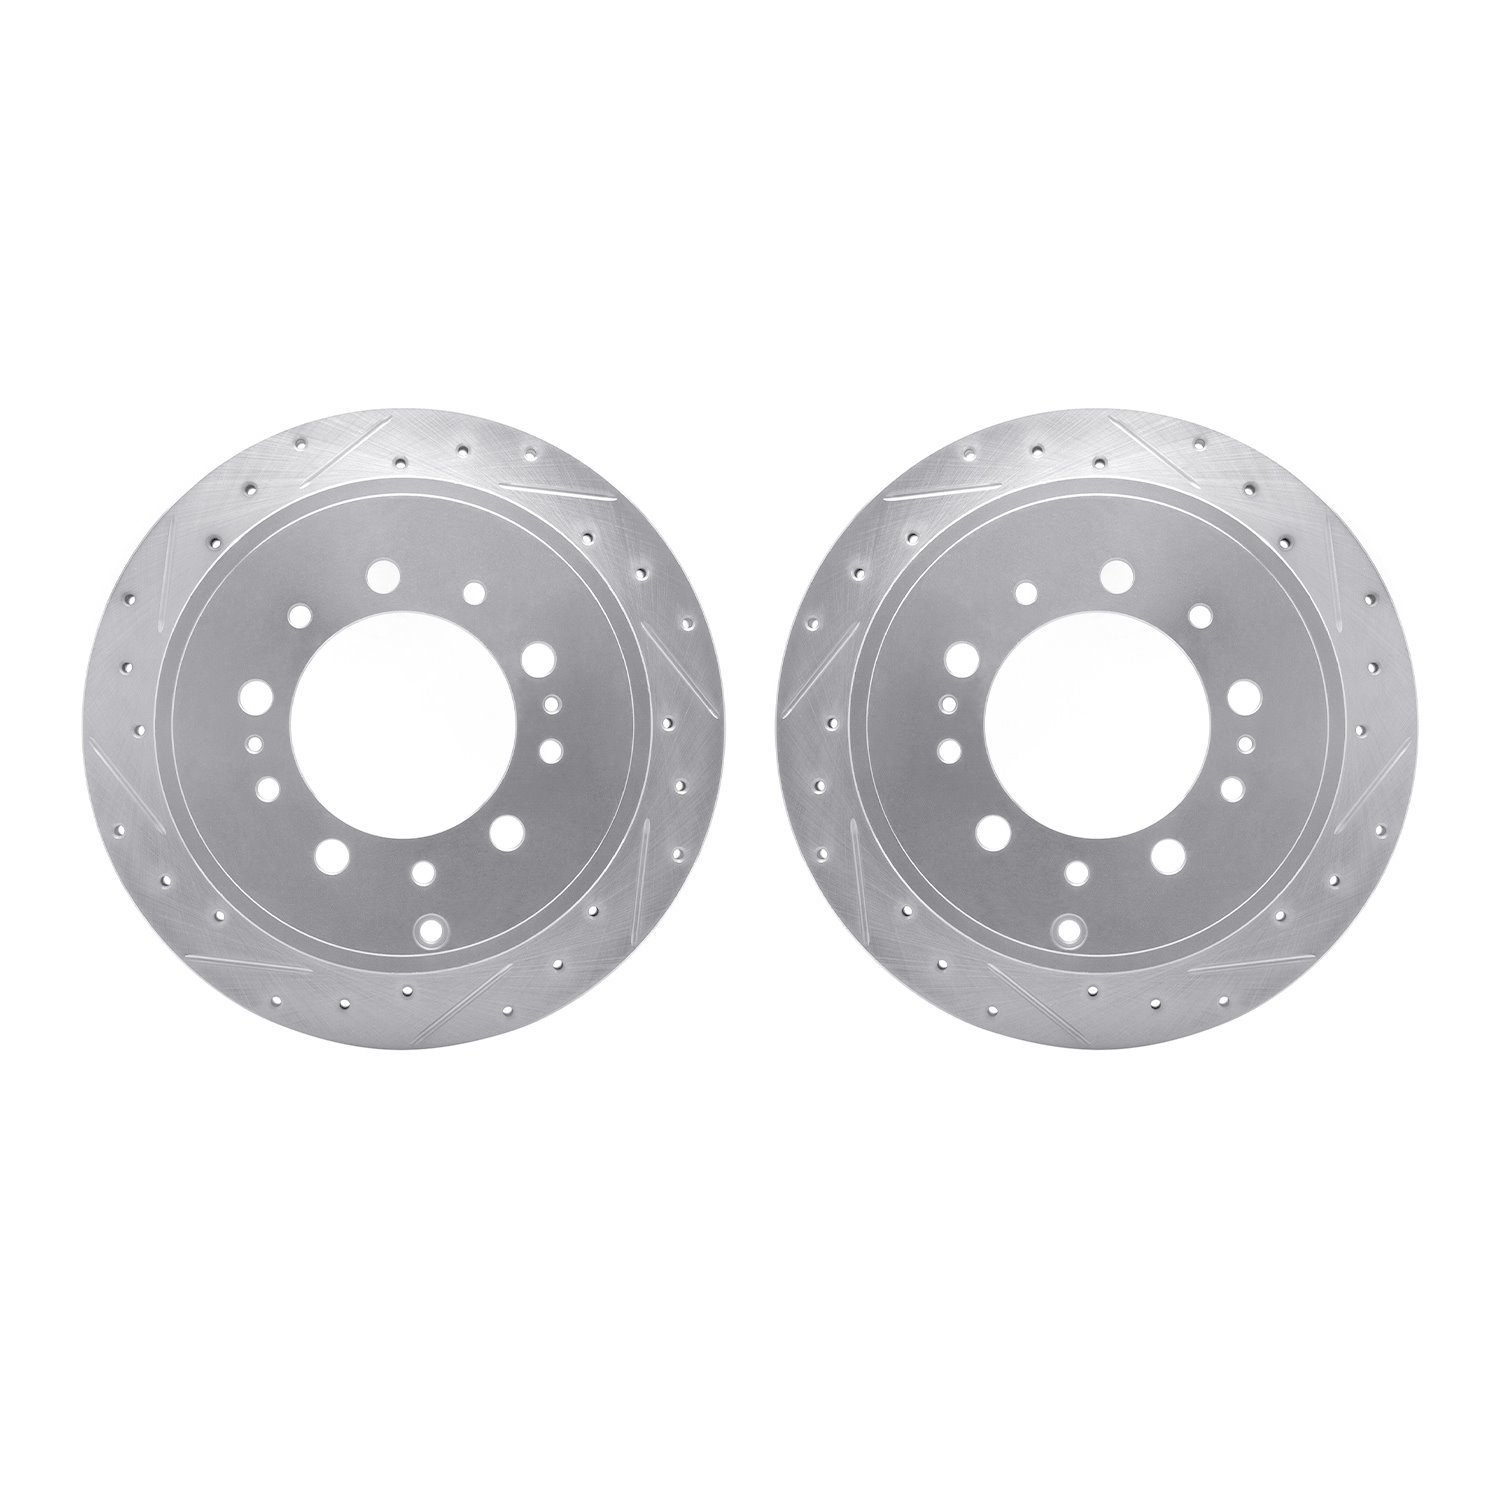 7002-76116 Drilled/Slotted Brake Rotors [Silver], Fits Select Lexus/Toyota/Scion, Position: Rear